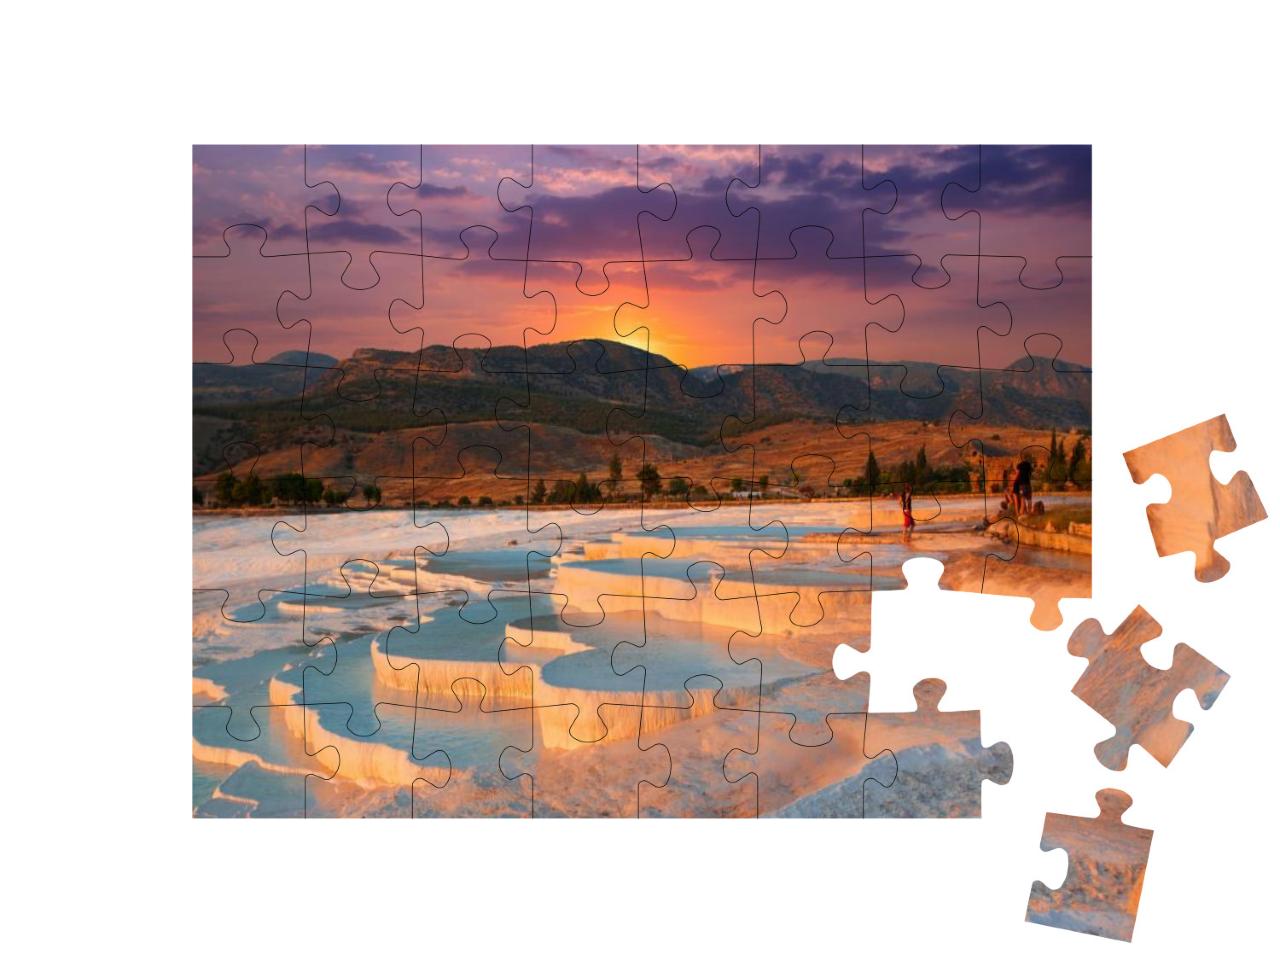 Beautiful Sunrise & Natural Travertine Pools & Terraces i... Jigsaw Puzzle with 48 pieces